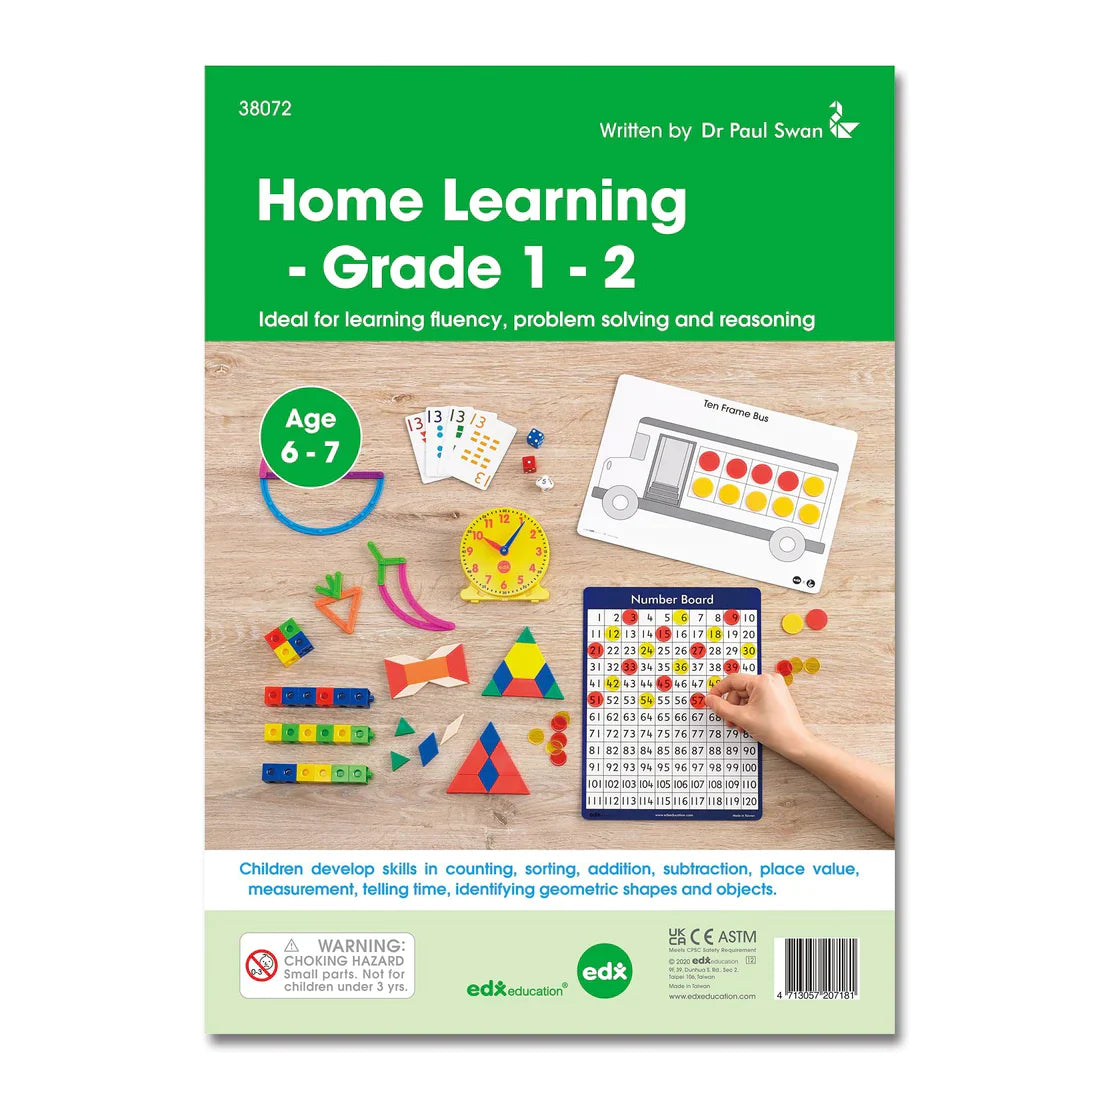 Tikit: Math Home Learning komplet, star 6-7 let